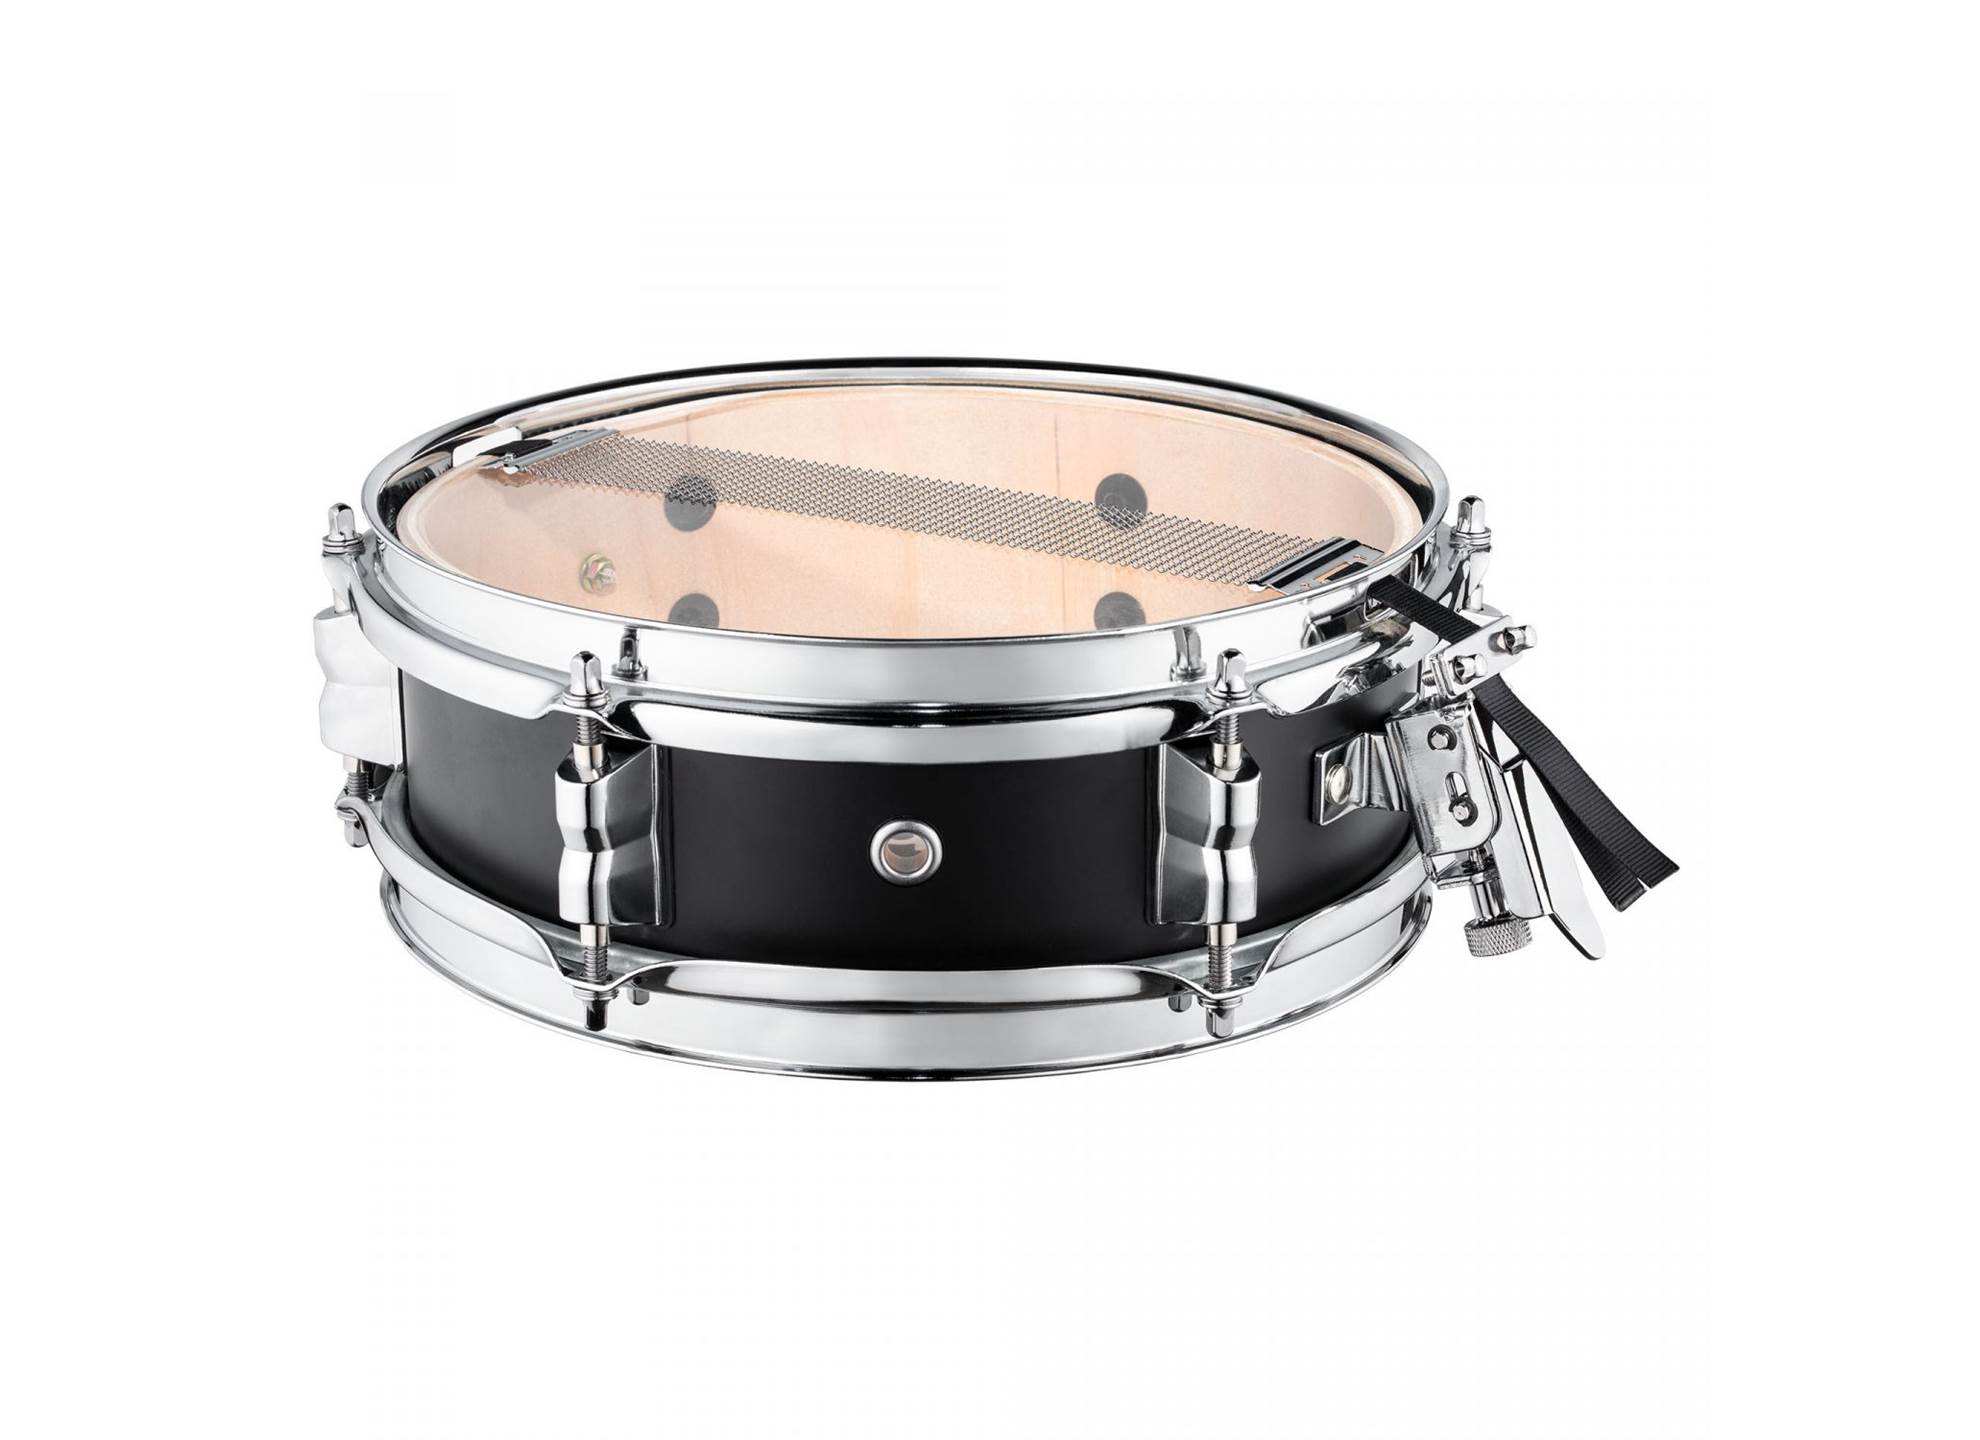 MPCSS Compact Side Snare Drum 10 tum